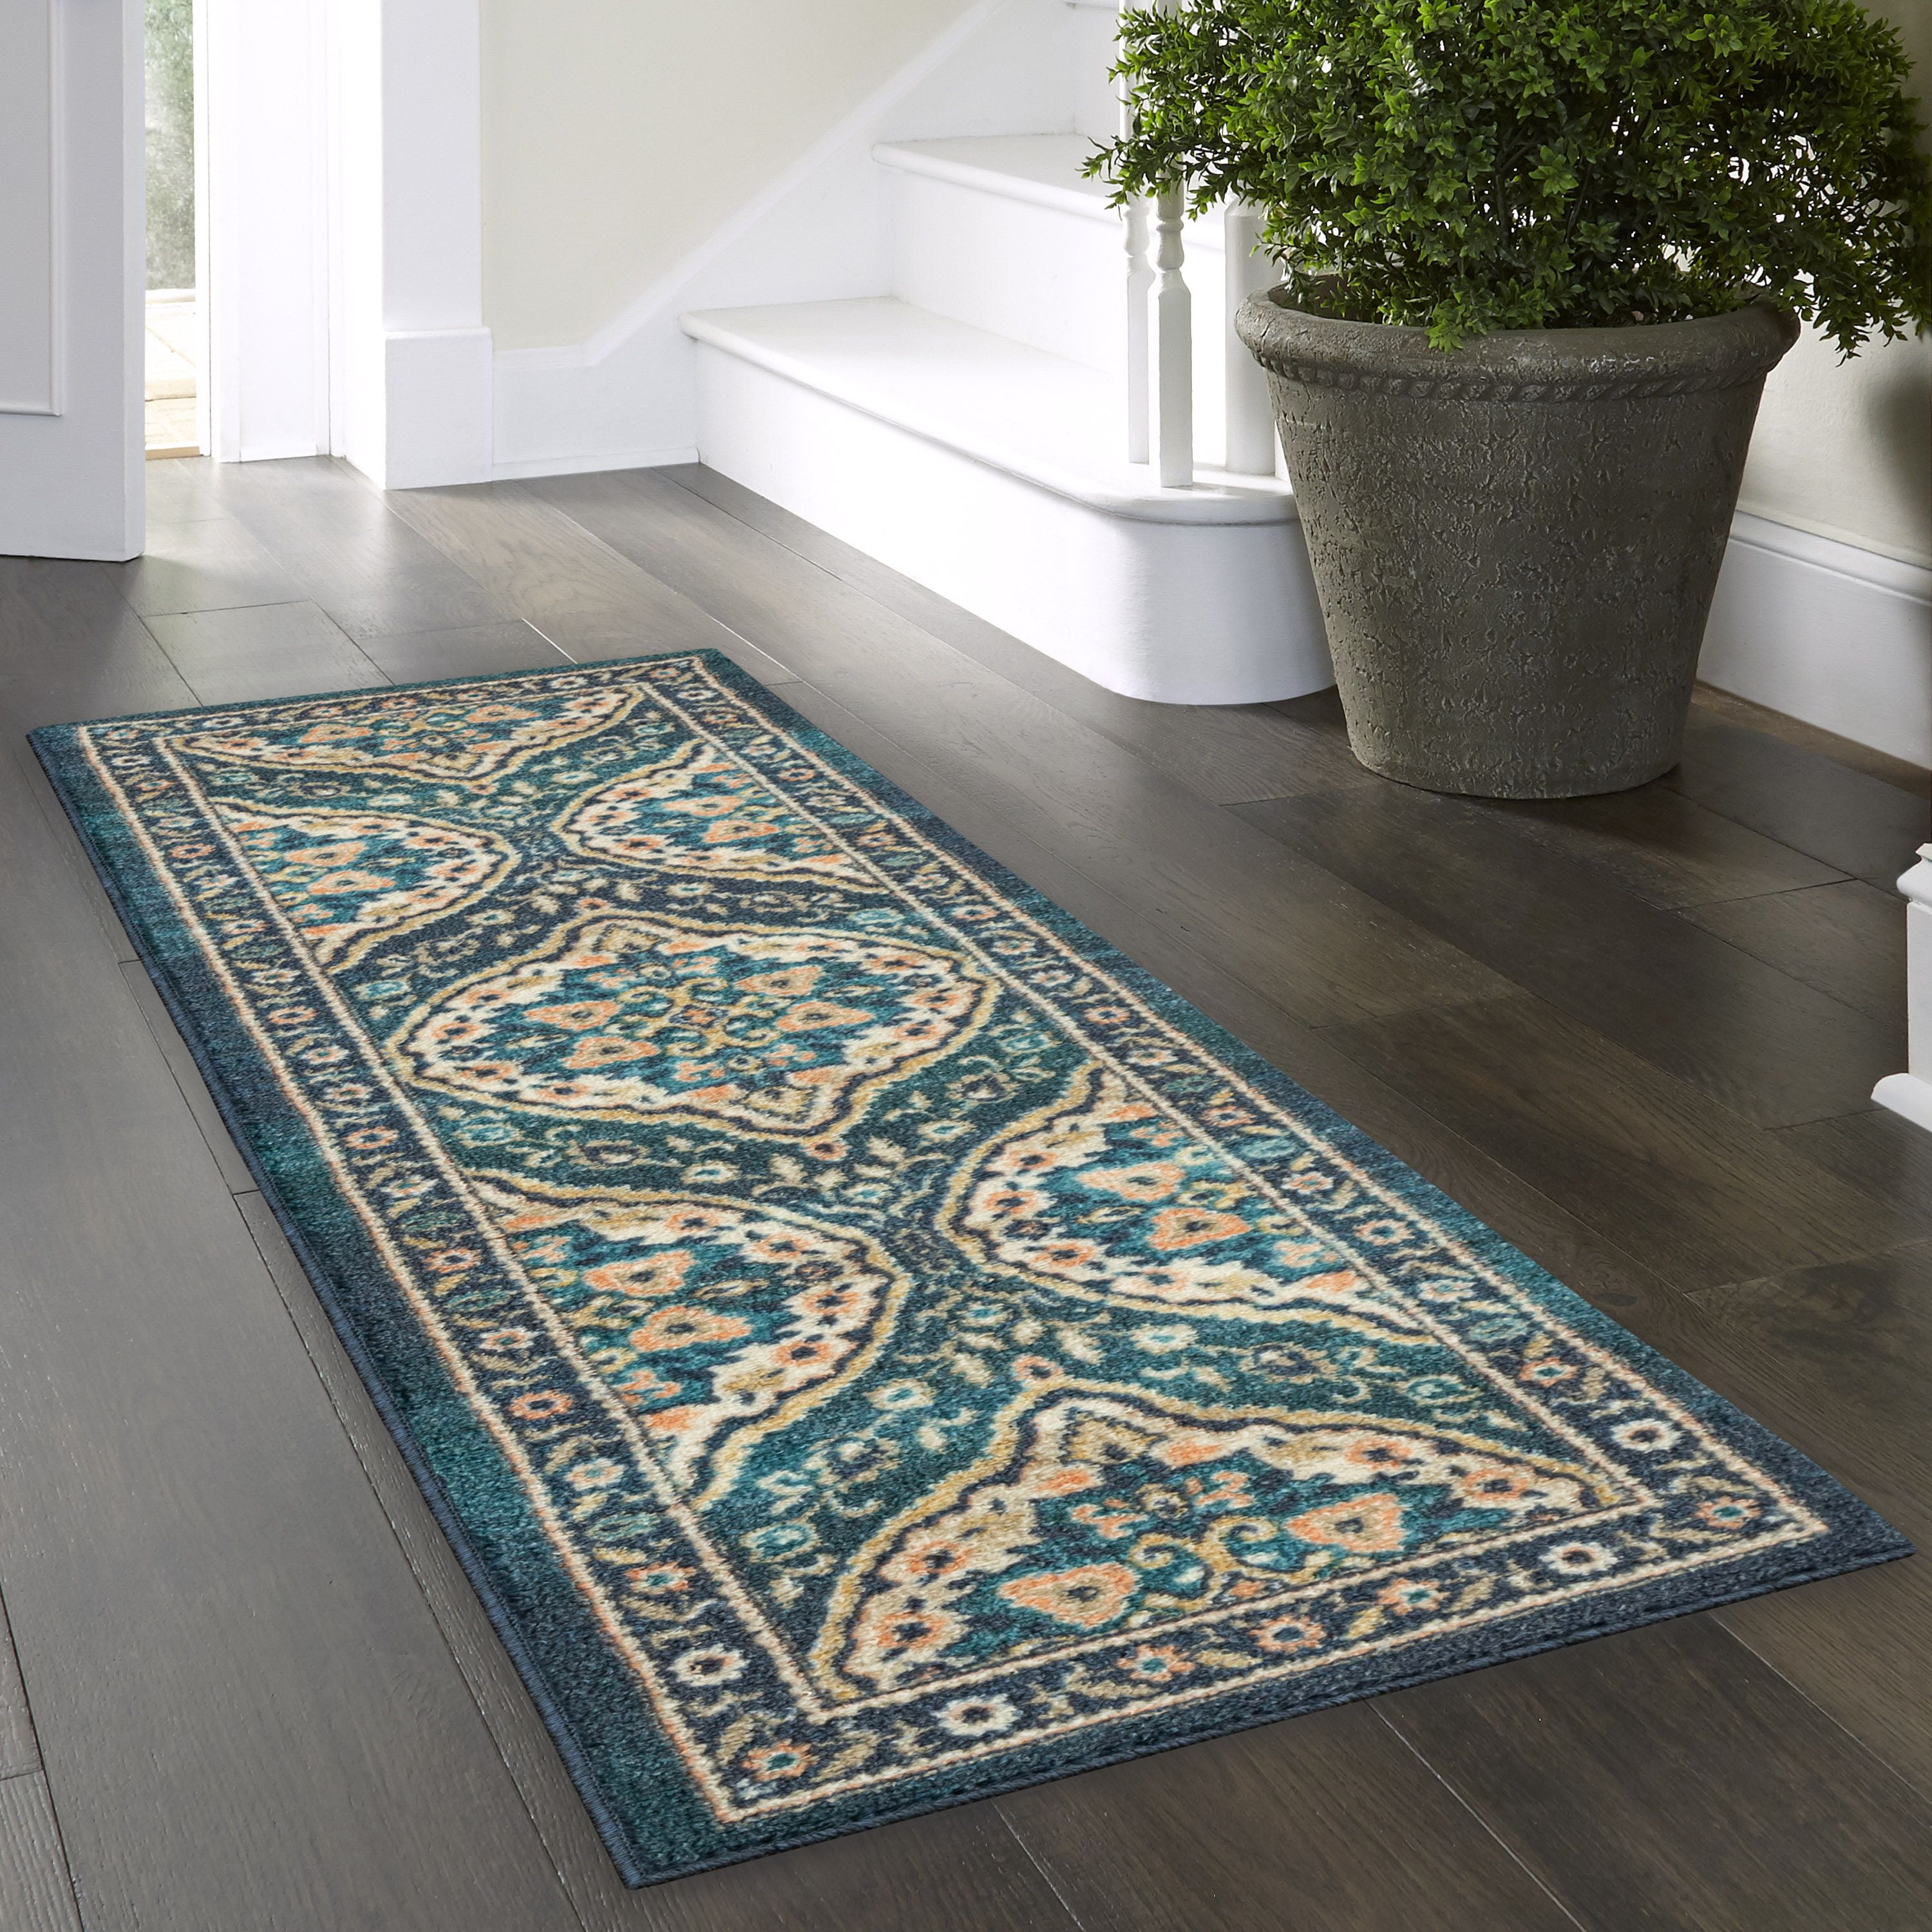 Terracotta Blue Persian Style Traditional Rug Non Slip Machine Washable  Stain Resistant Living Room Bedroom Kitchen Mat Hallway Runner Rugs 